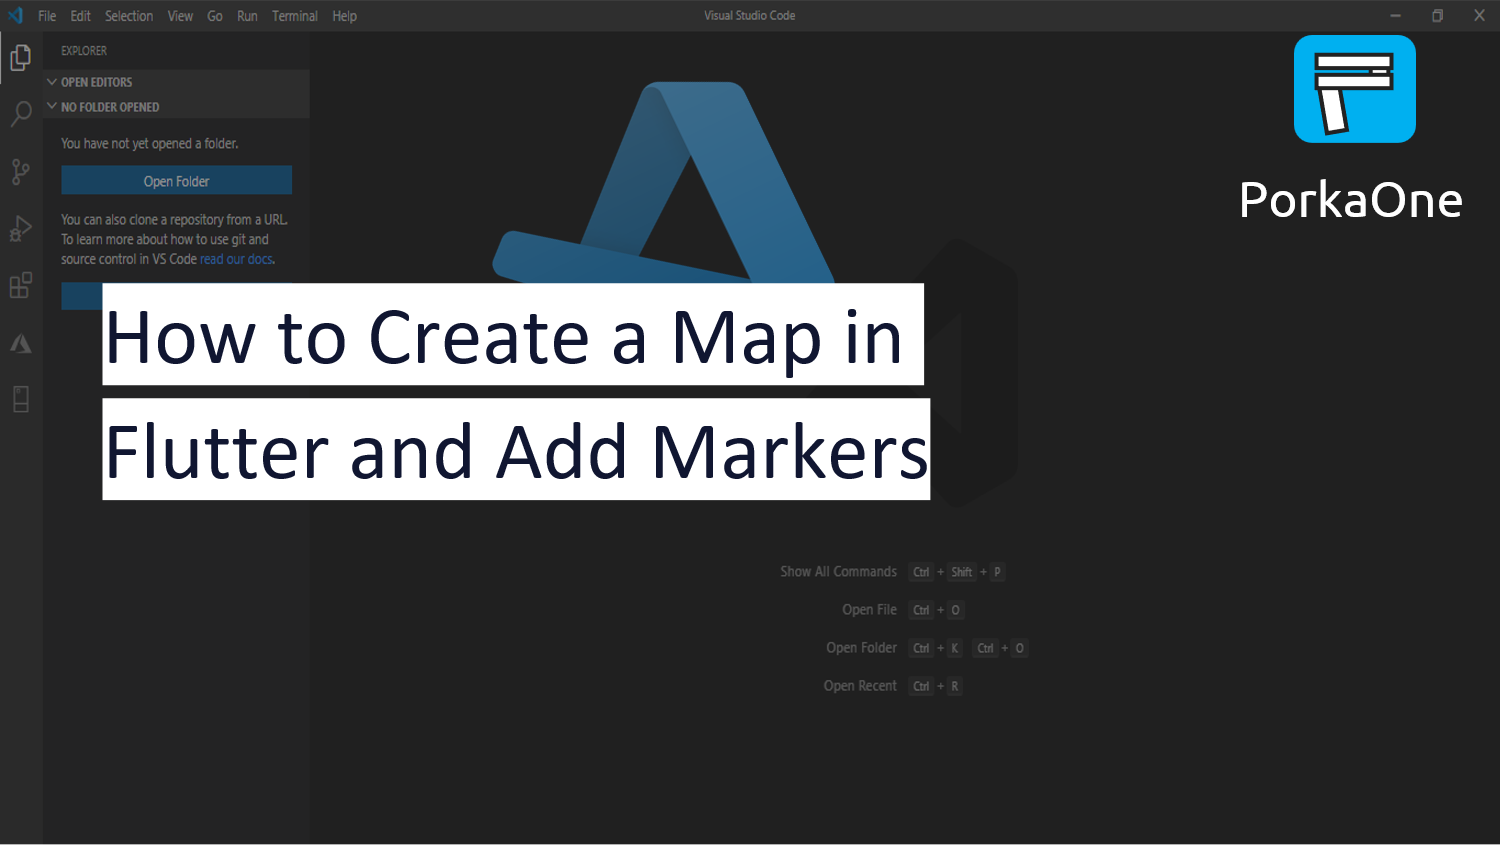 How to Create a Map in Flutter and Add Markers